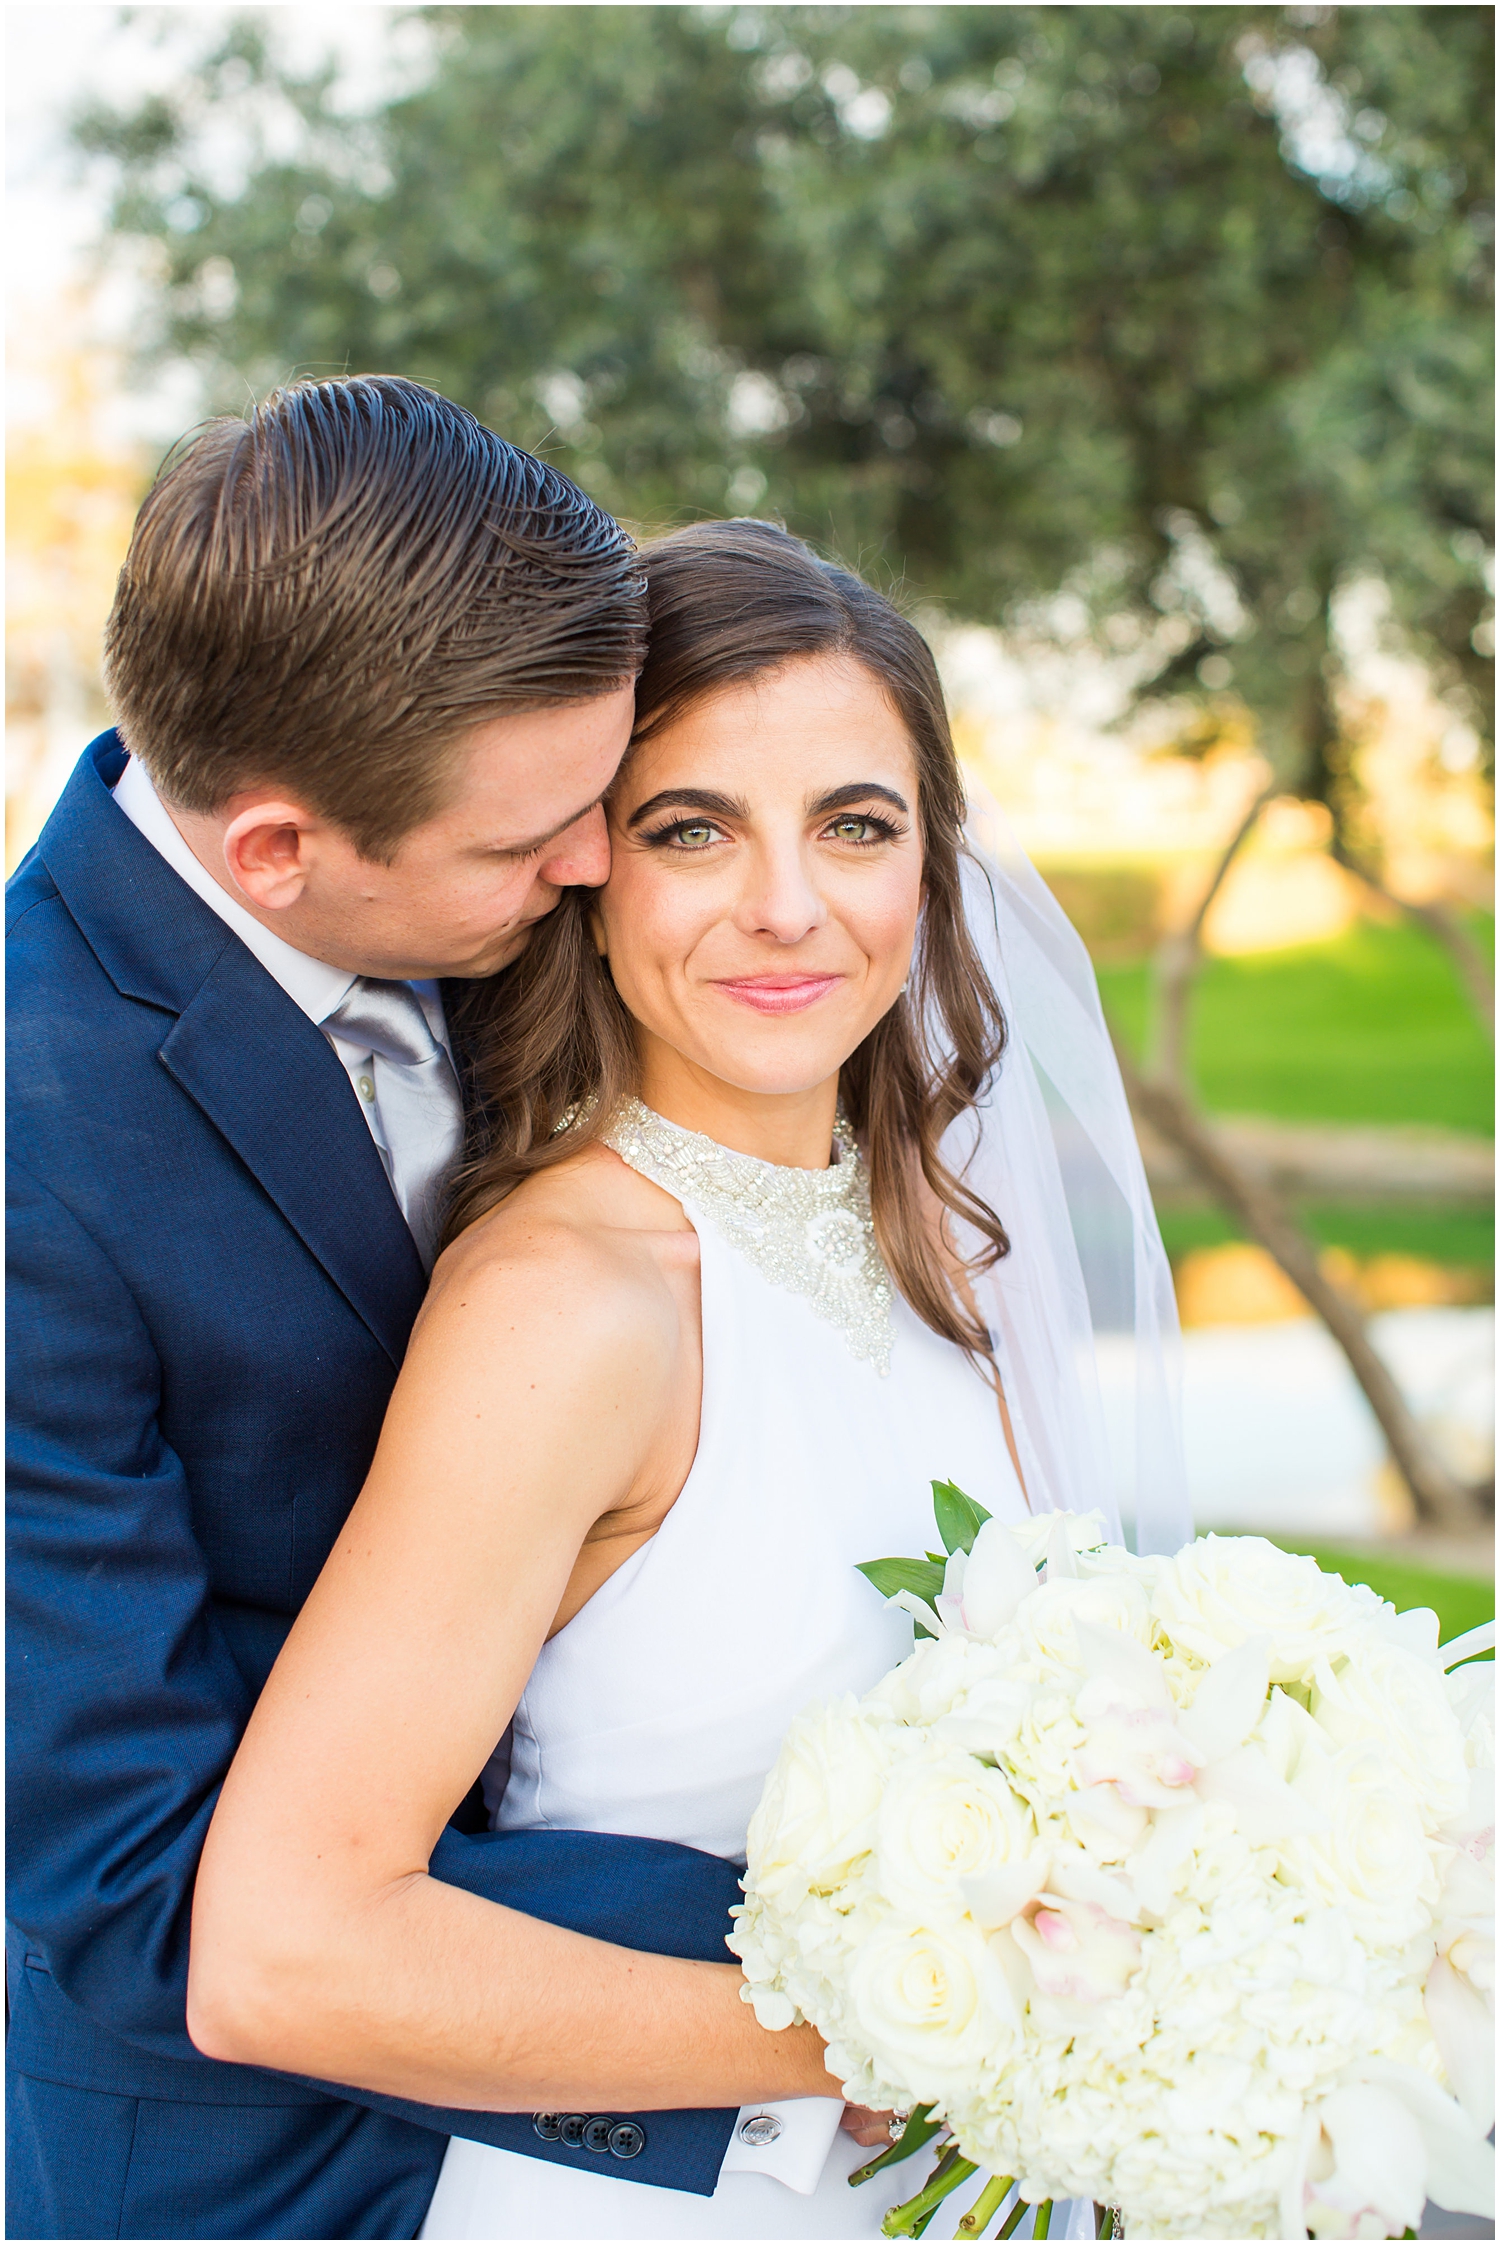 bride in demetrios bridal gown racerback with sheer beading with white hydrangeas bouquet with groom in navy blue suit with light blue tie wedding day portrait